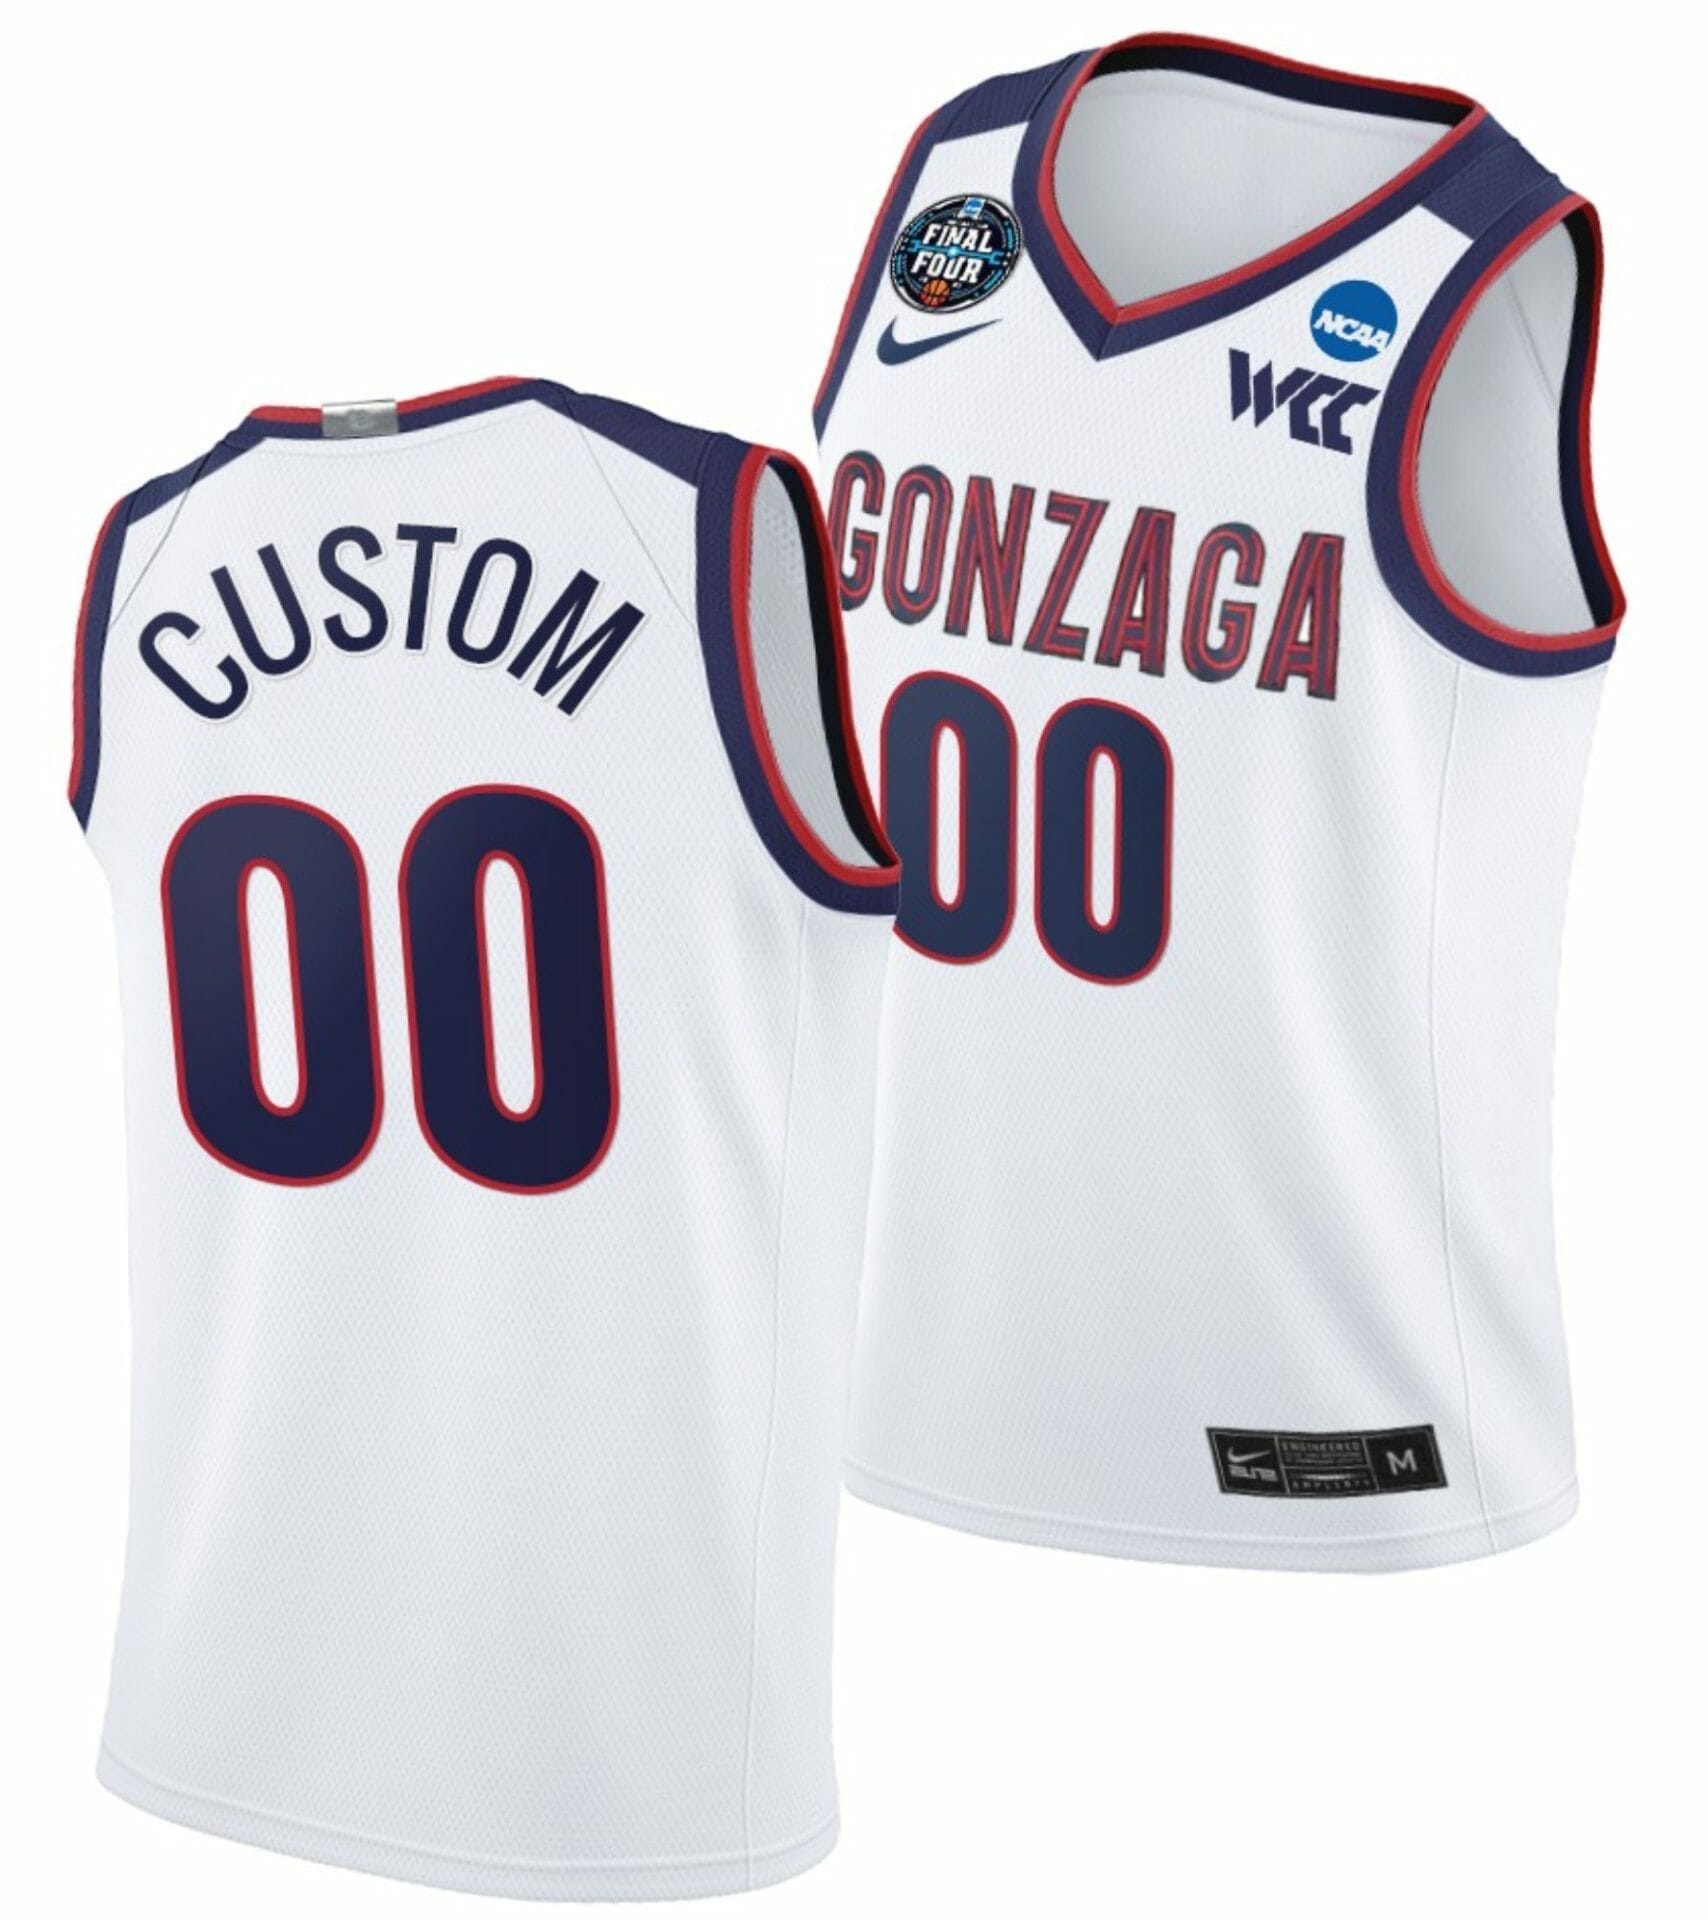 Custom College Basketball Jerseys Gonzaga Jersey March Madness Name and Number Classic White